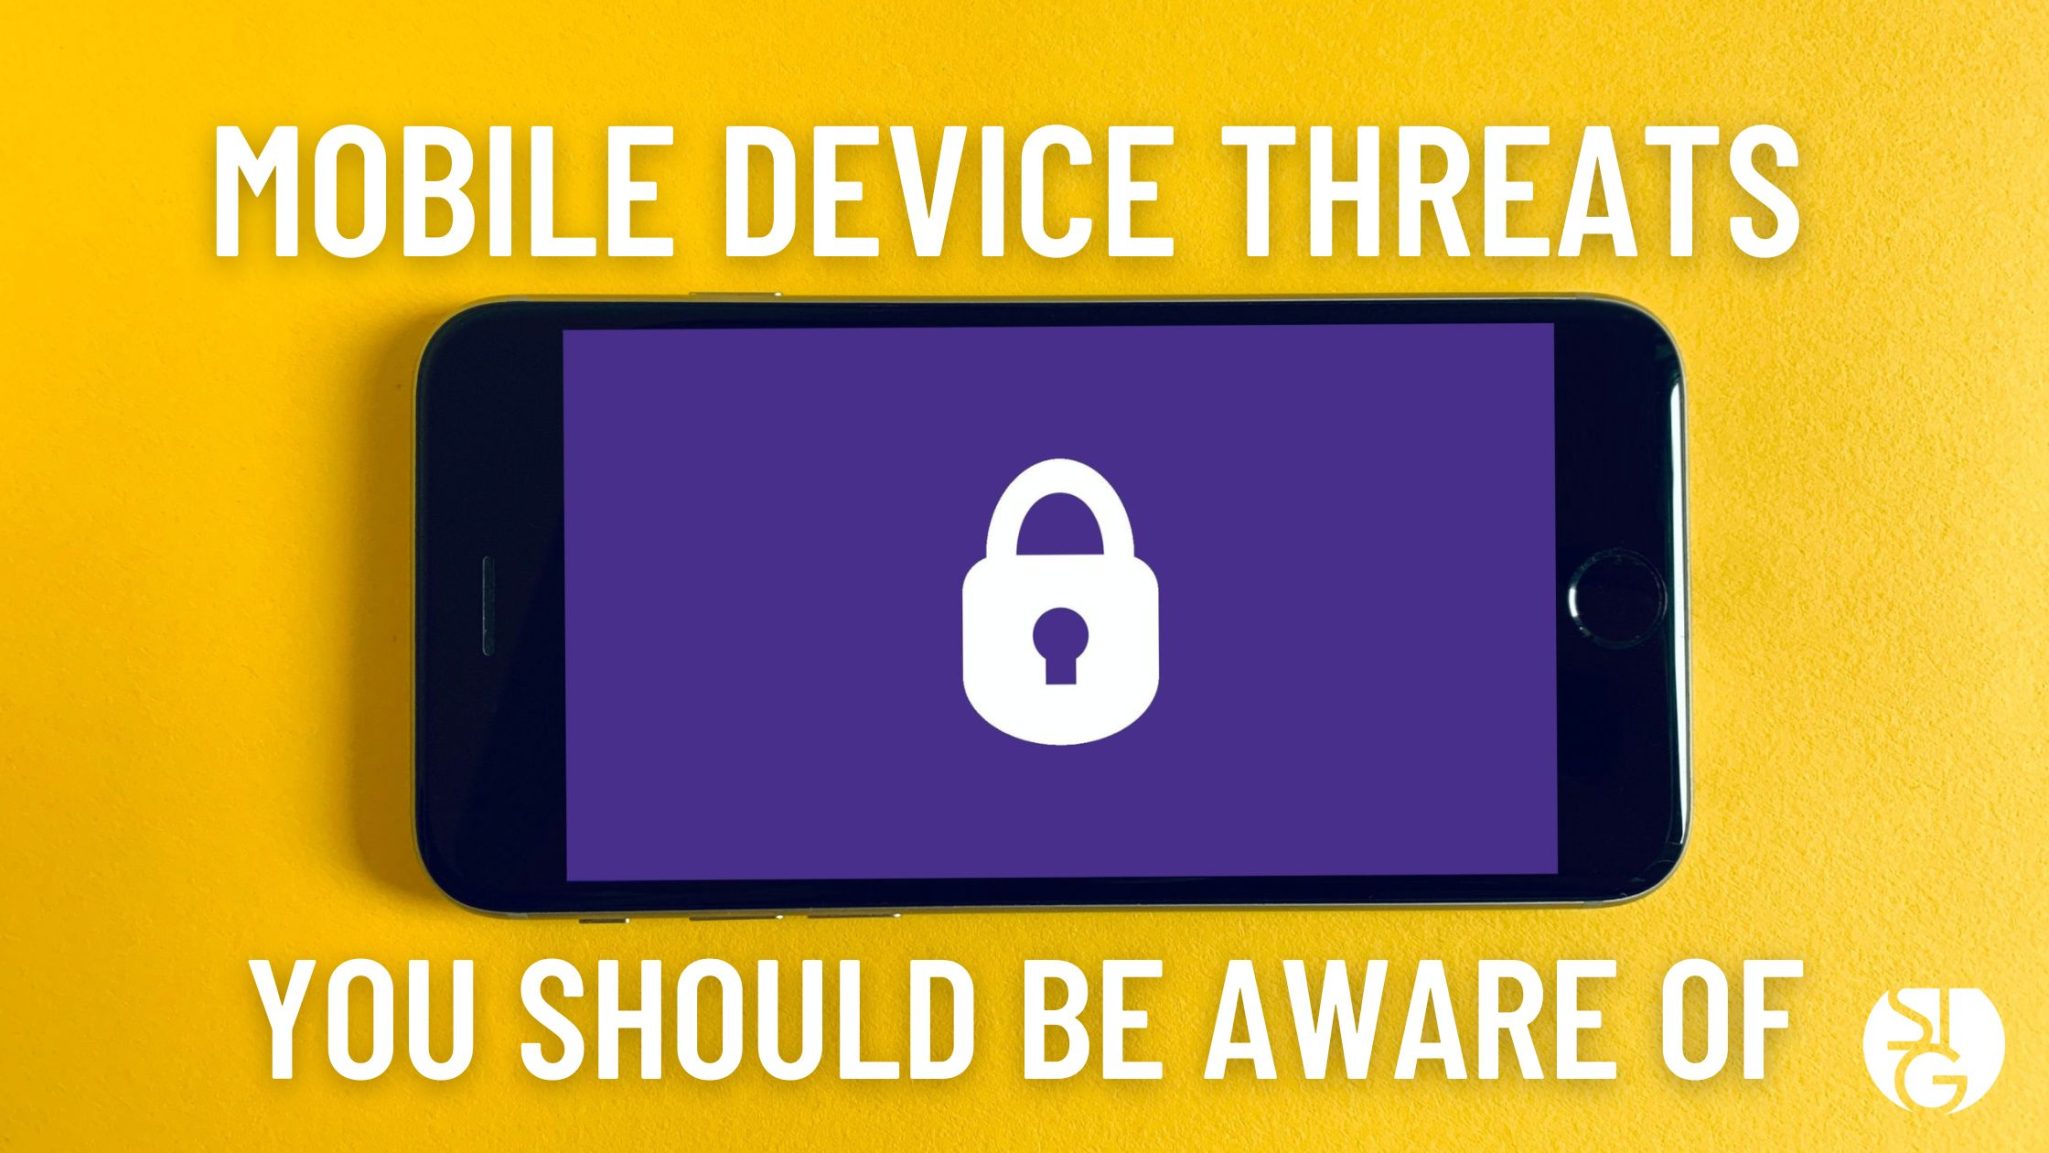 Mobile Device Threats You Should Be Aware Of